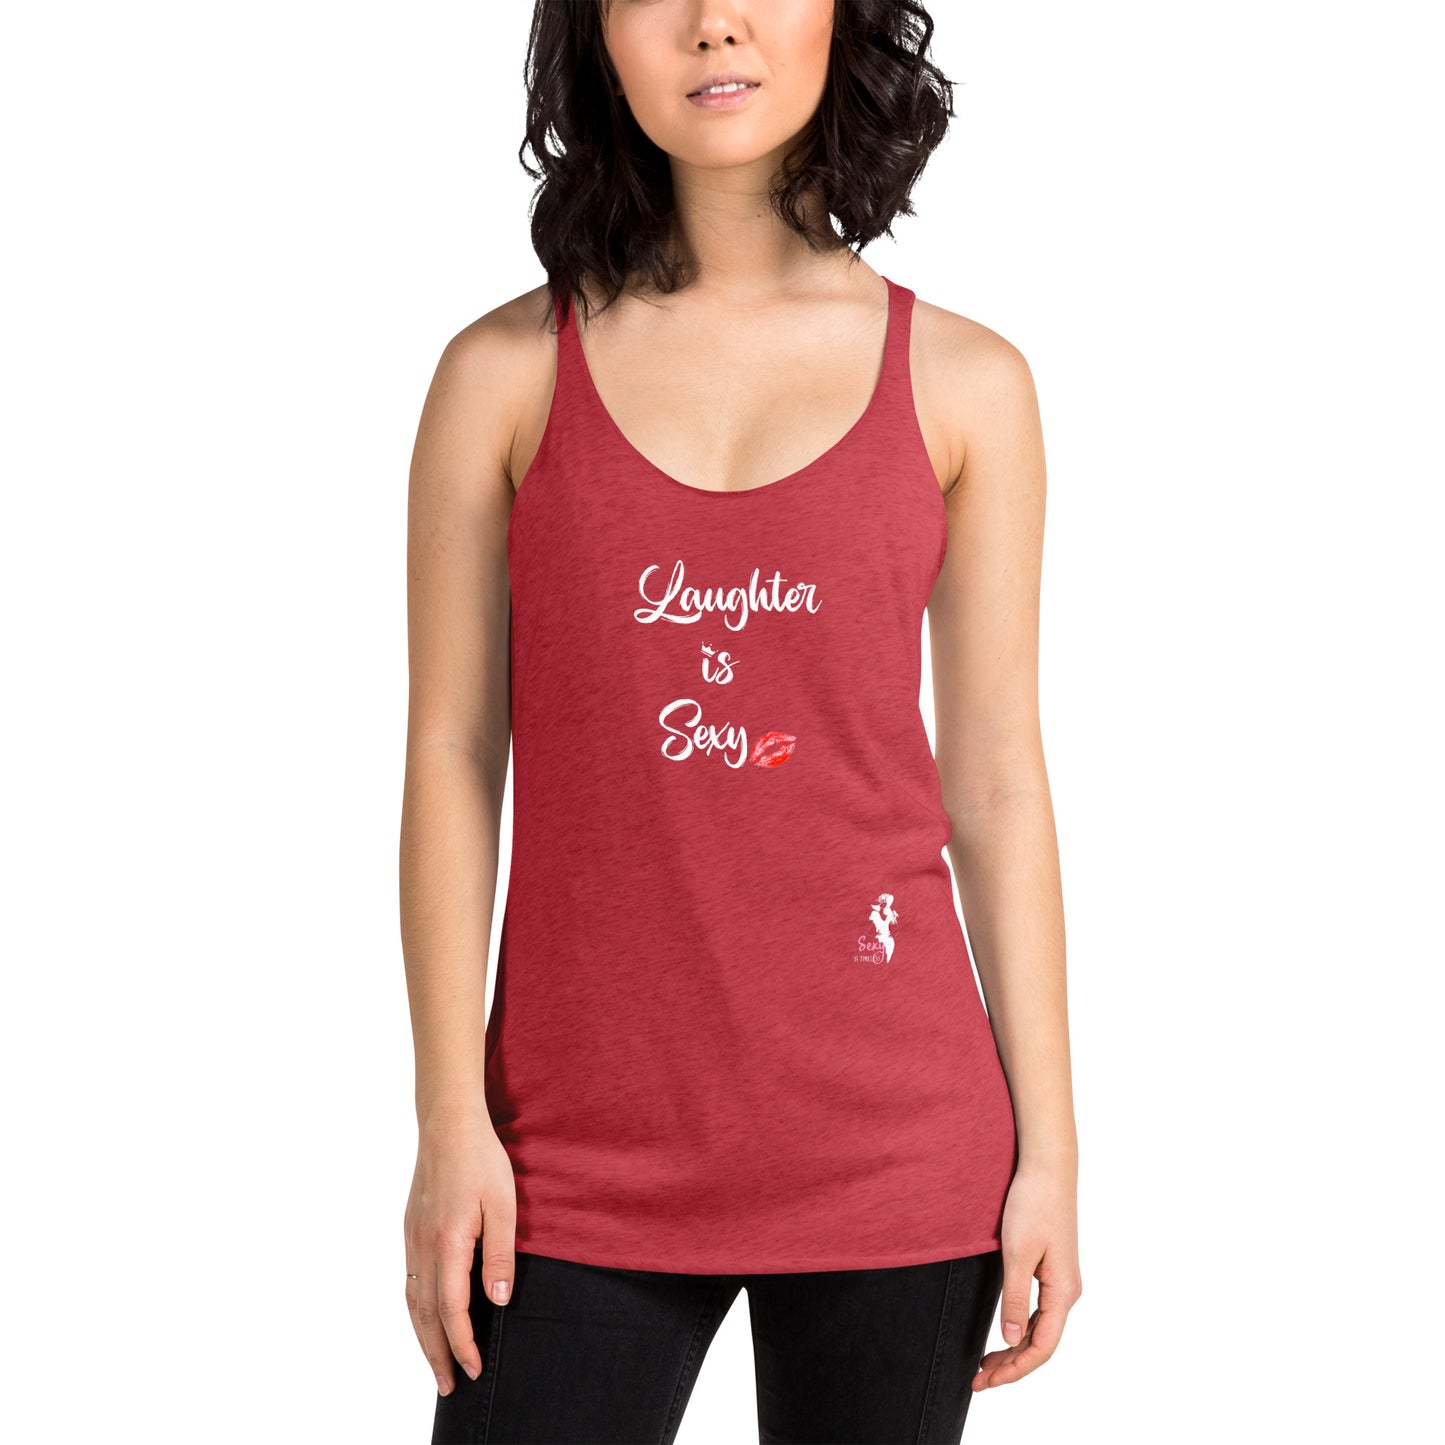 Women's Racerback Tank - Laughter is Sexy - Colors